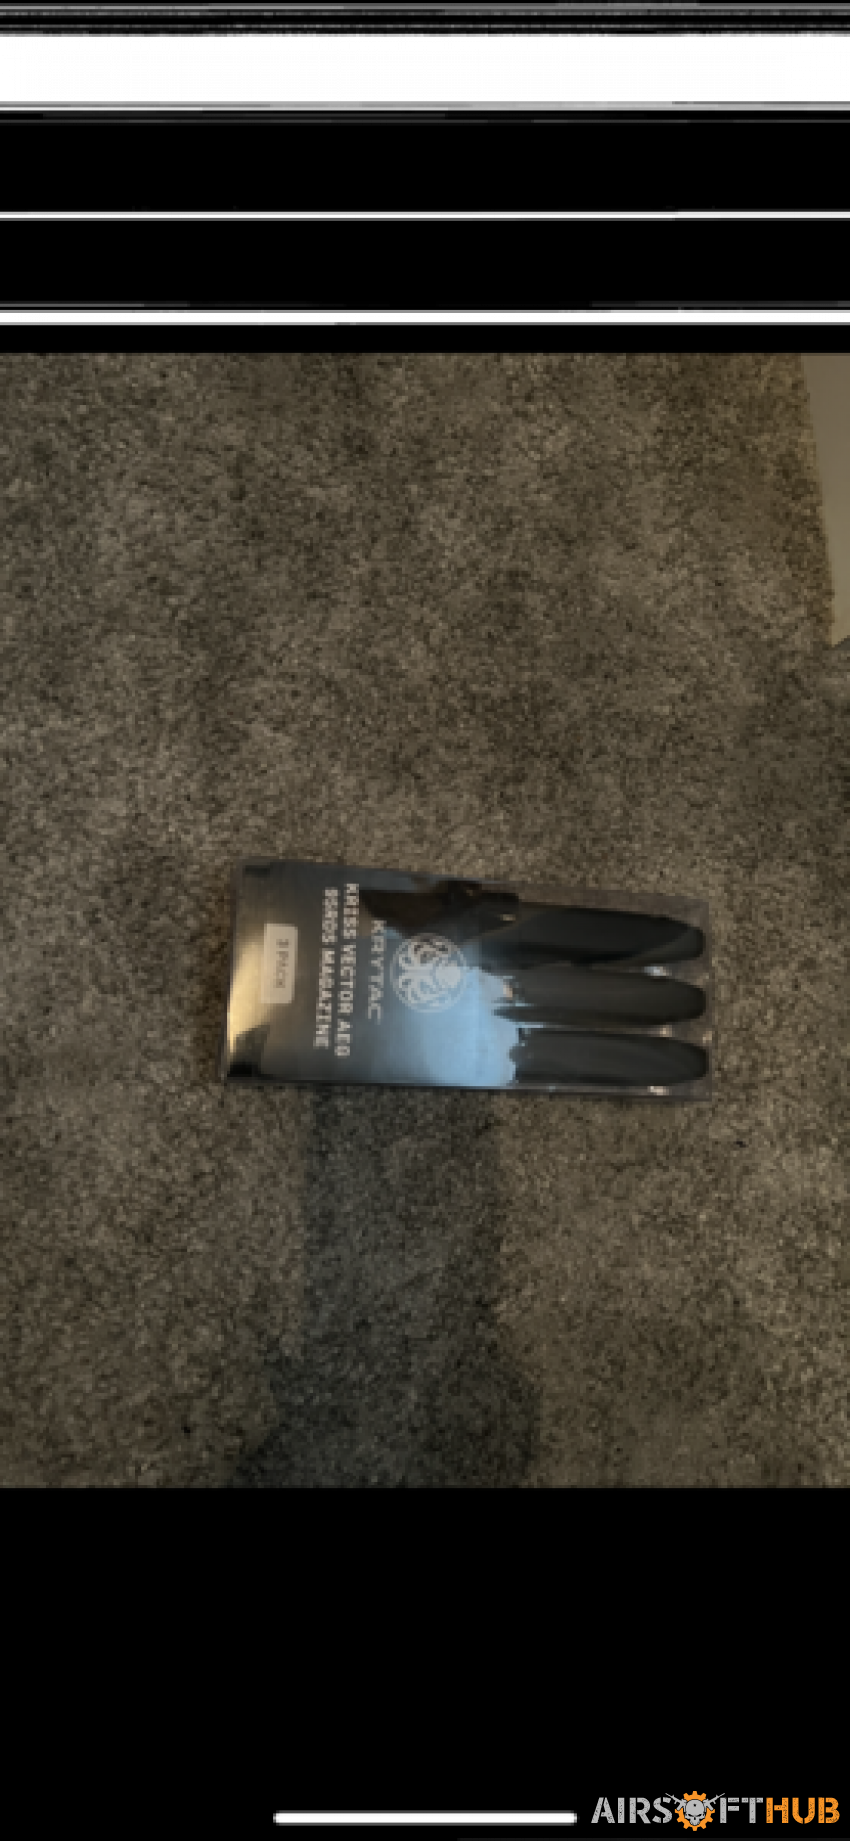 Pack of 3 KRYTAC Magazines - Used airsoft equipment